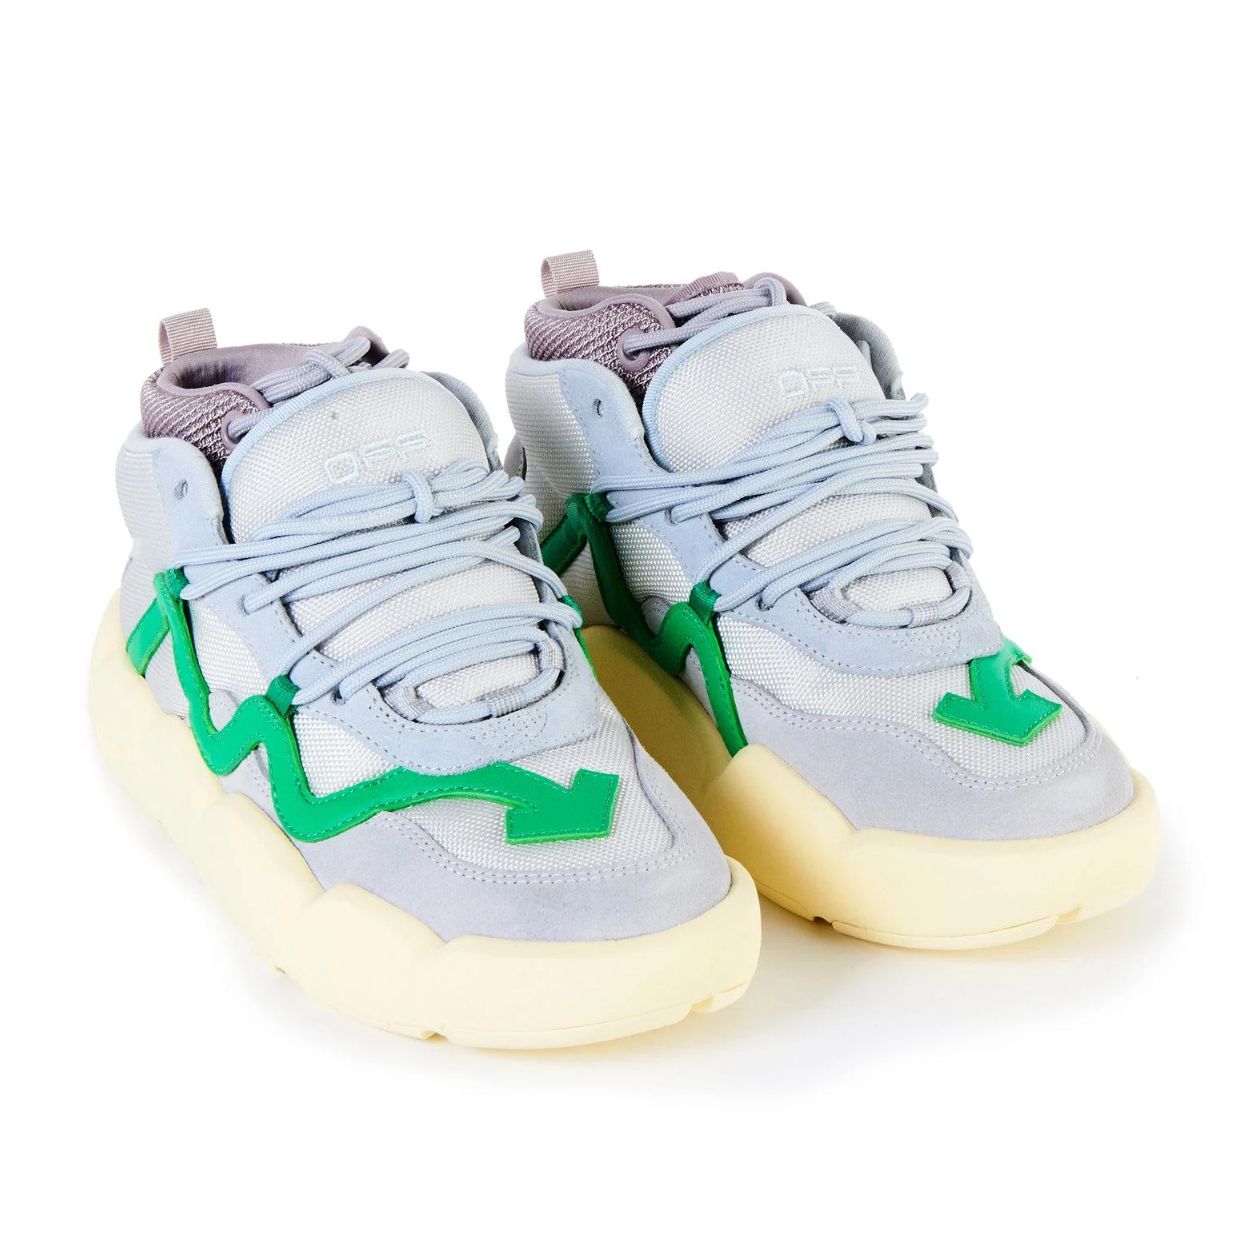 Off-White Chic Tech-Fabric and Suede Sneakers